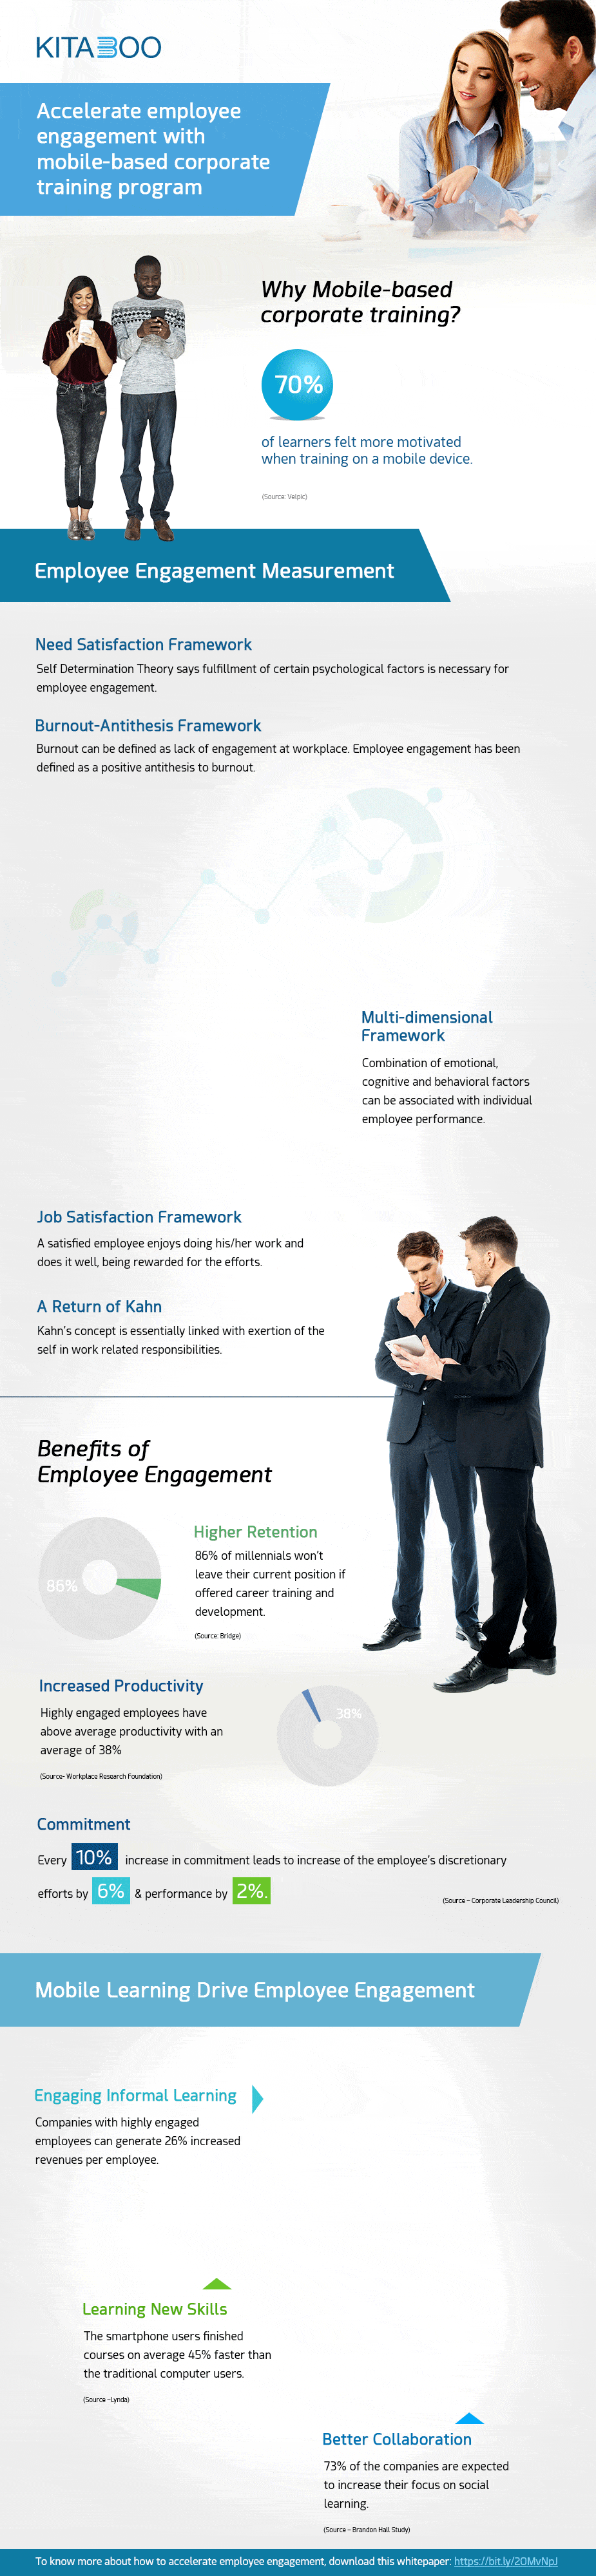 Accelerate Employee Engagement With Mobile-Based Corporate Training Program Infographic